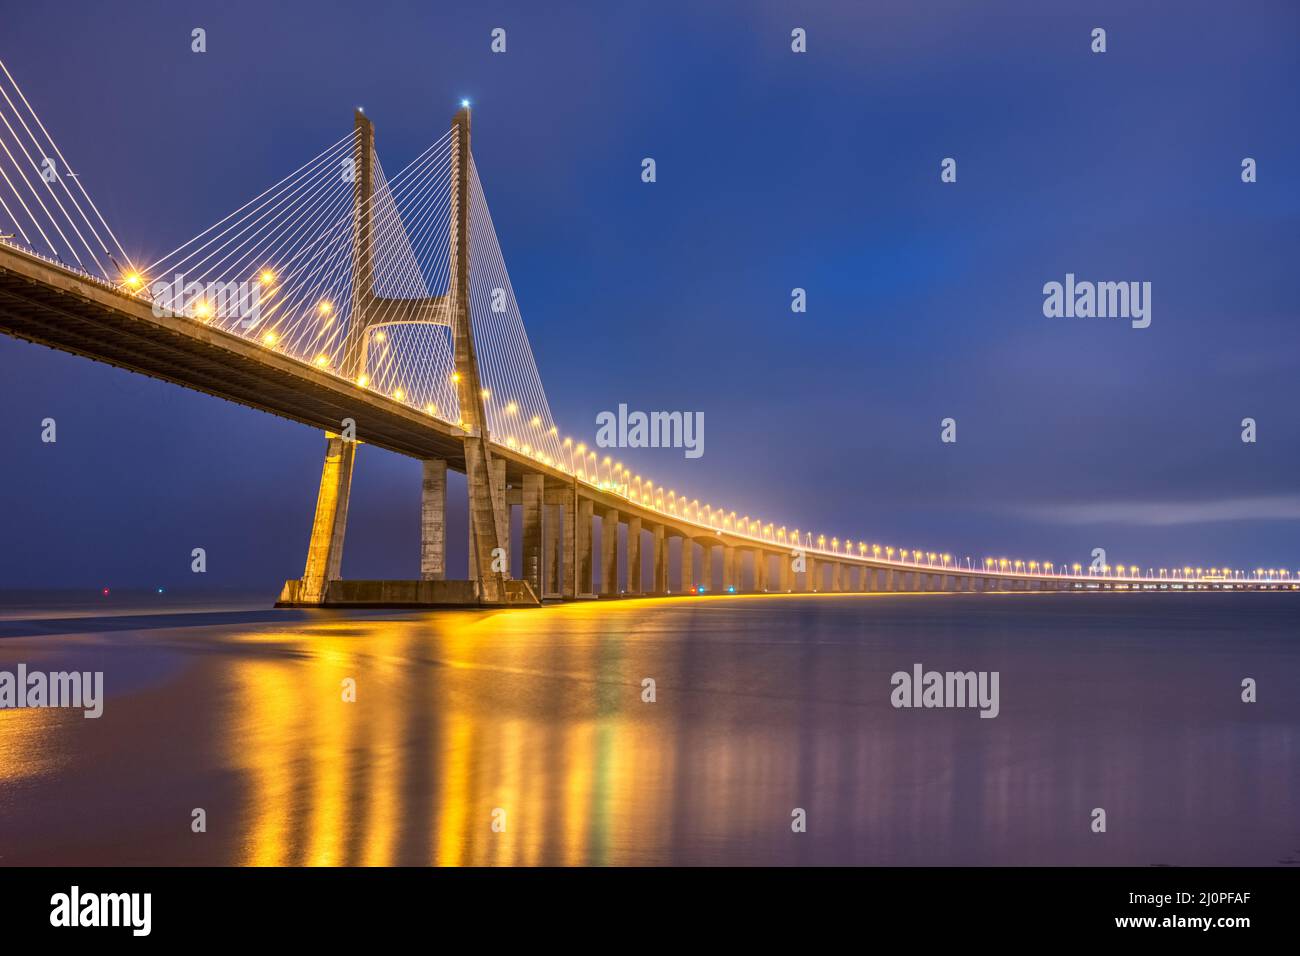 The imposing cable-stayed Vasco da Gama bridge across the river Tagus in Lisbon, Portugal, at night Stock Photo